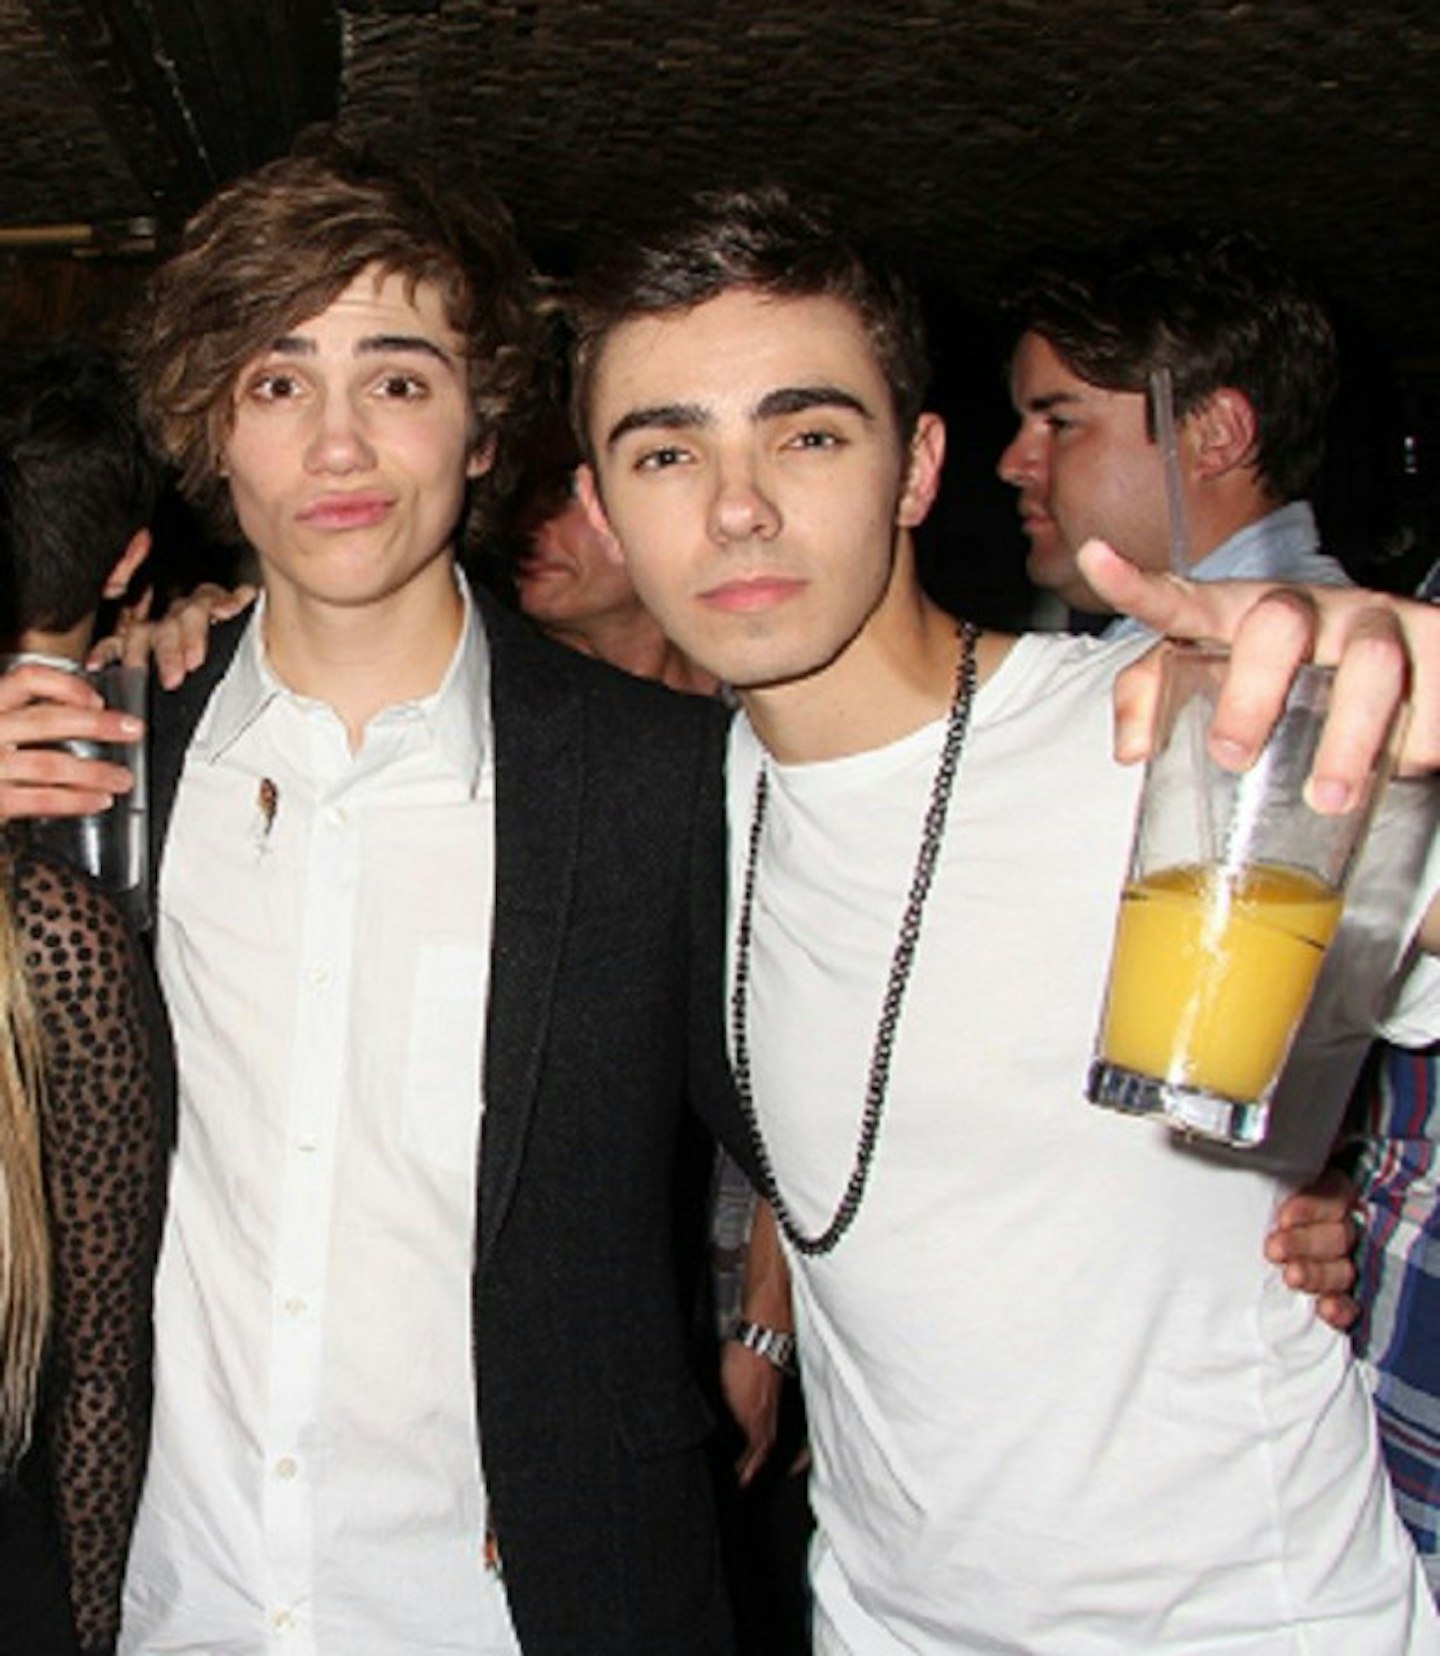 George from Union J and Nathan from The Wanted